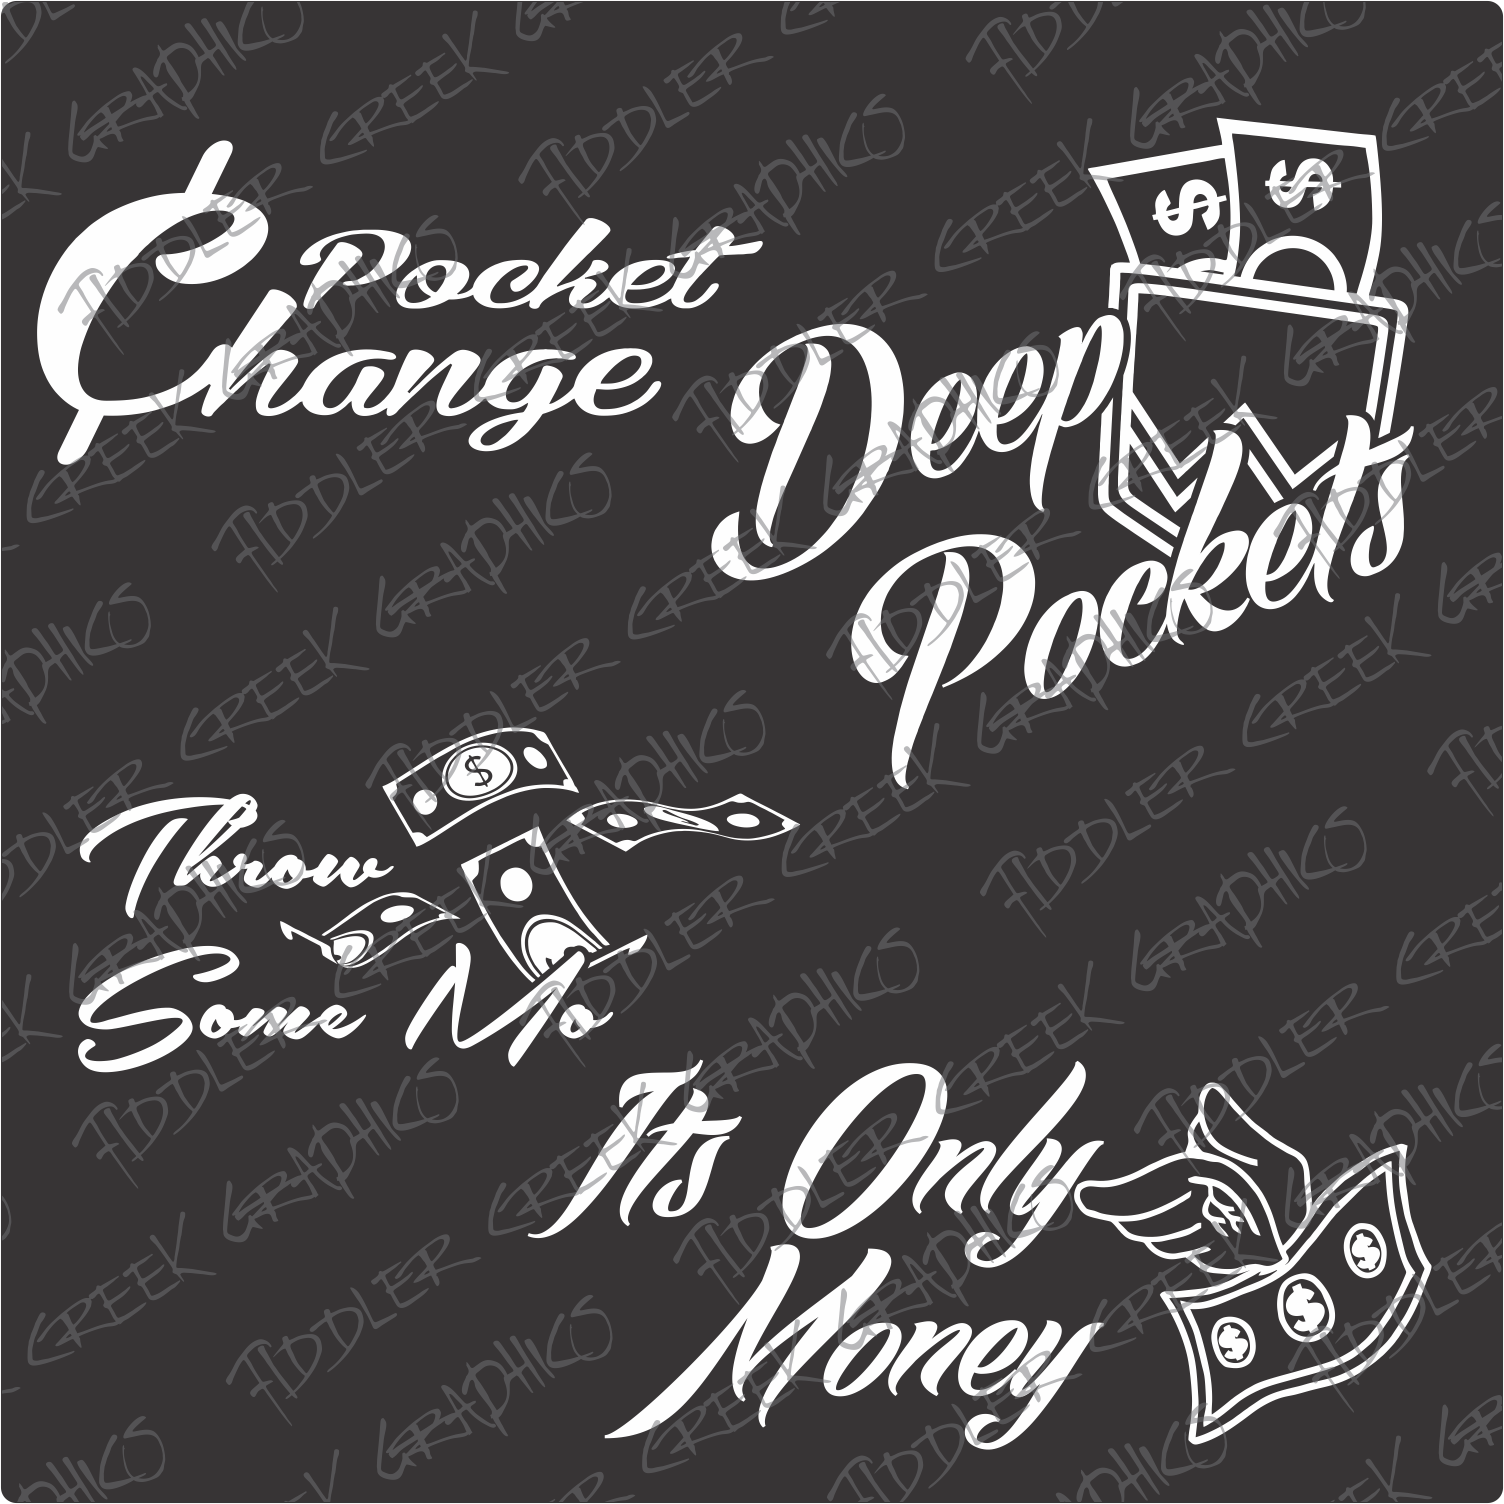 All About The Money Decals